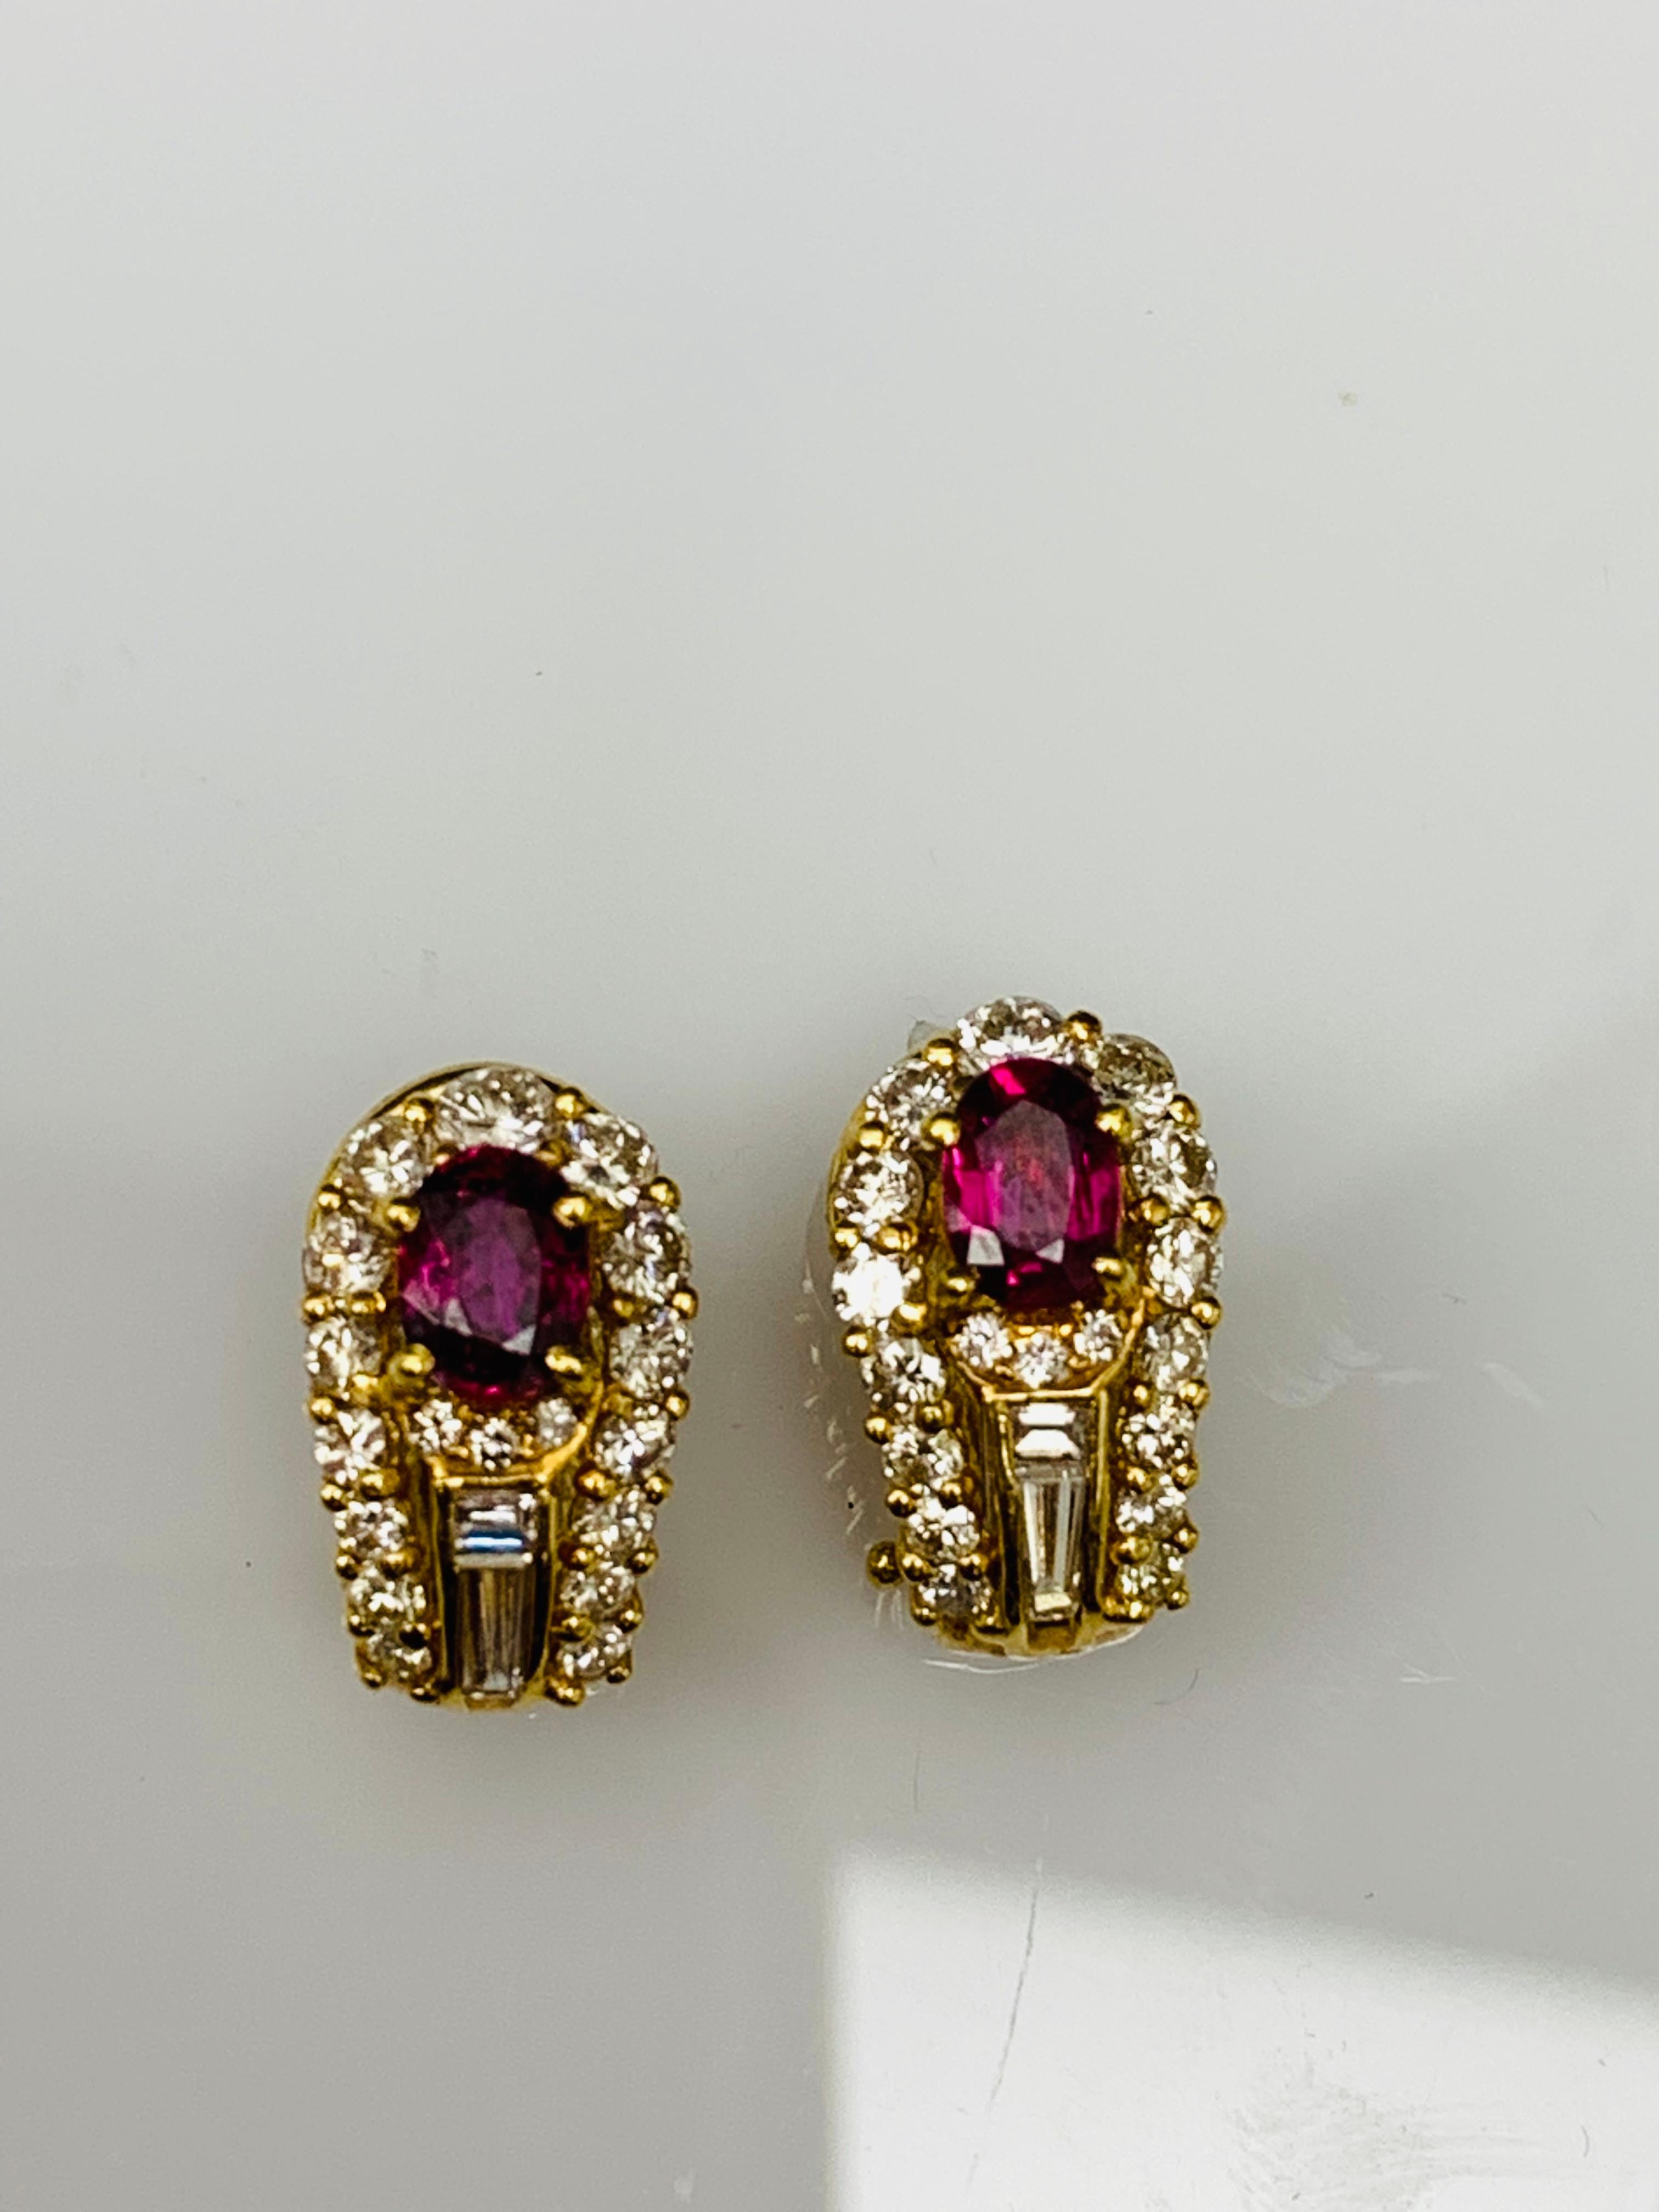 1.21 Carat Oval Cut Ruby and Diamond Earrings in 18K Yellow Gold For Sale 9